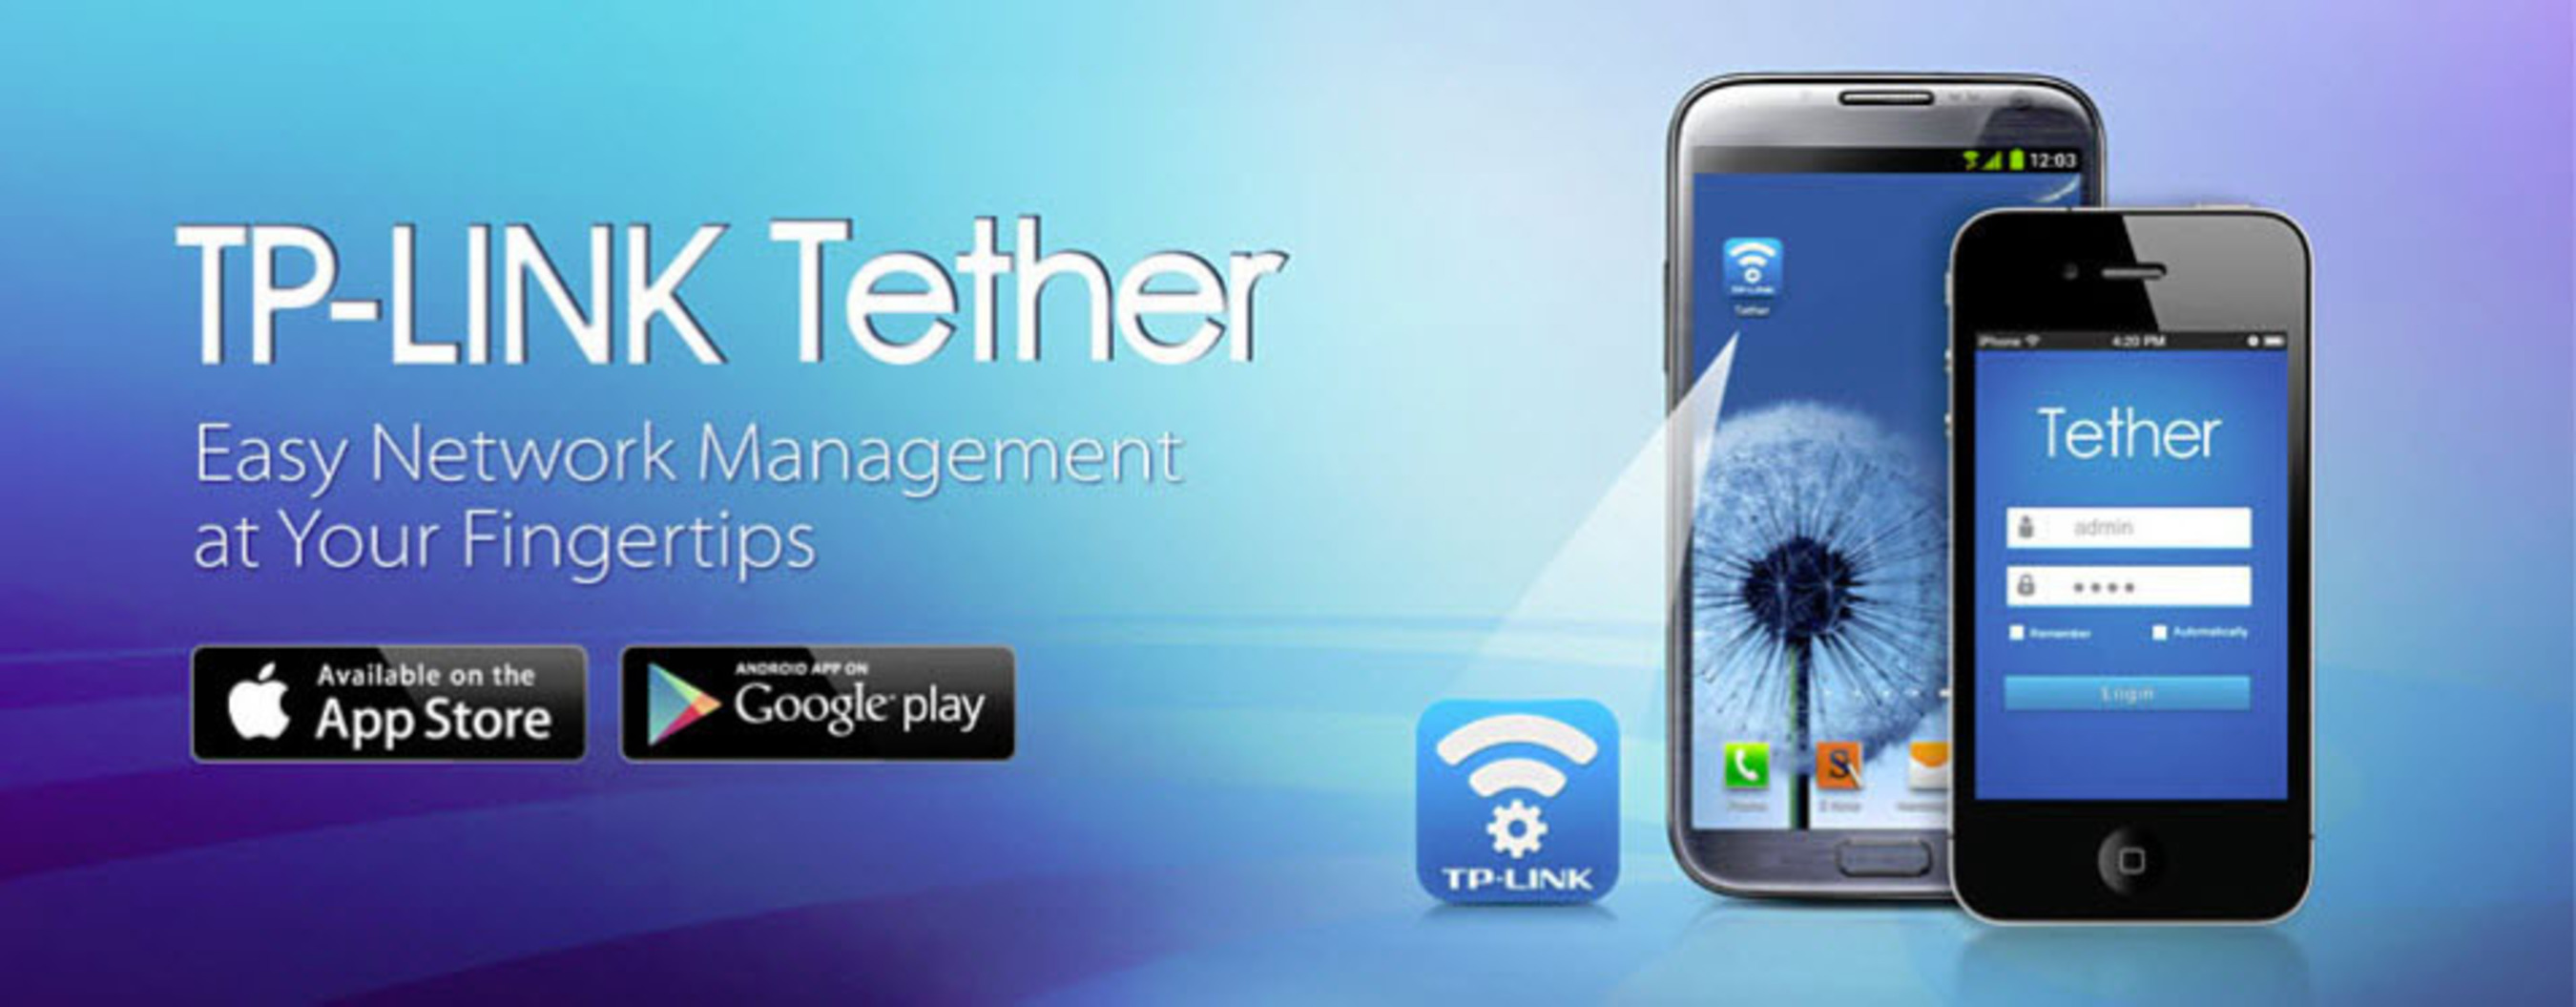 http: tether.com android